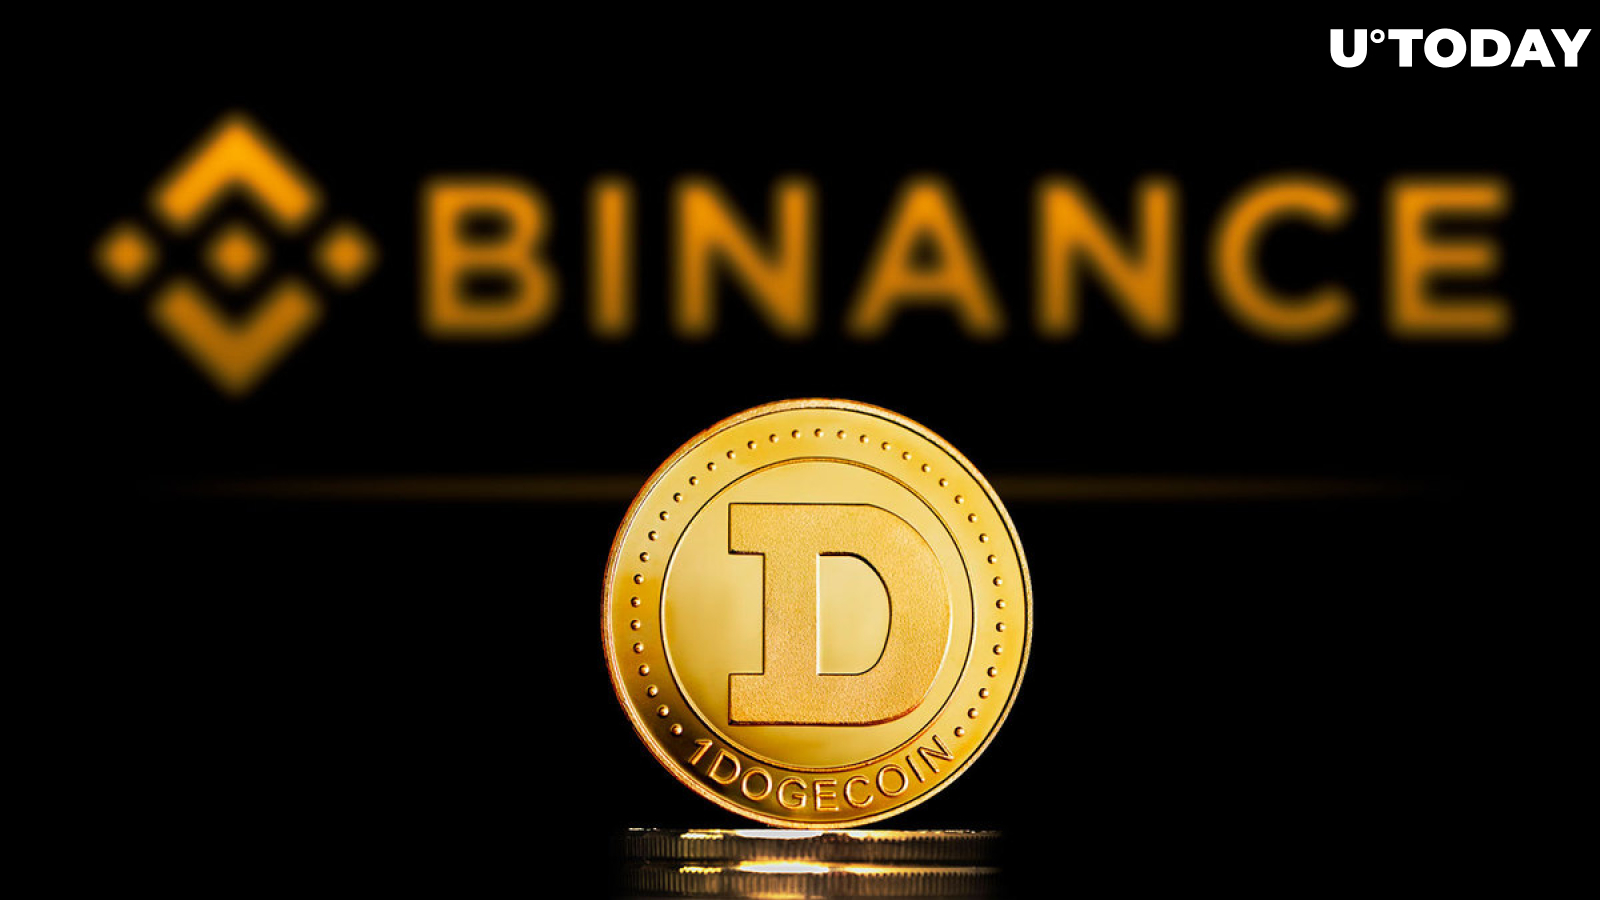 776 Million Dogecoin Moved by Anons, 1/3 Goes to Binance: Details